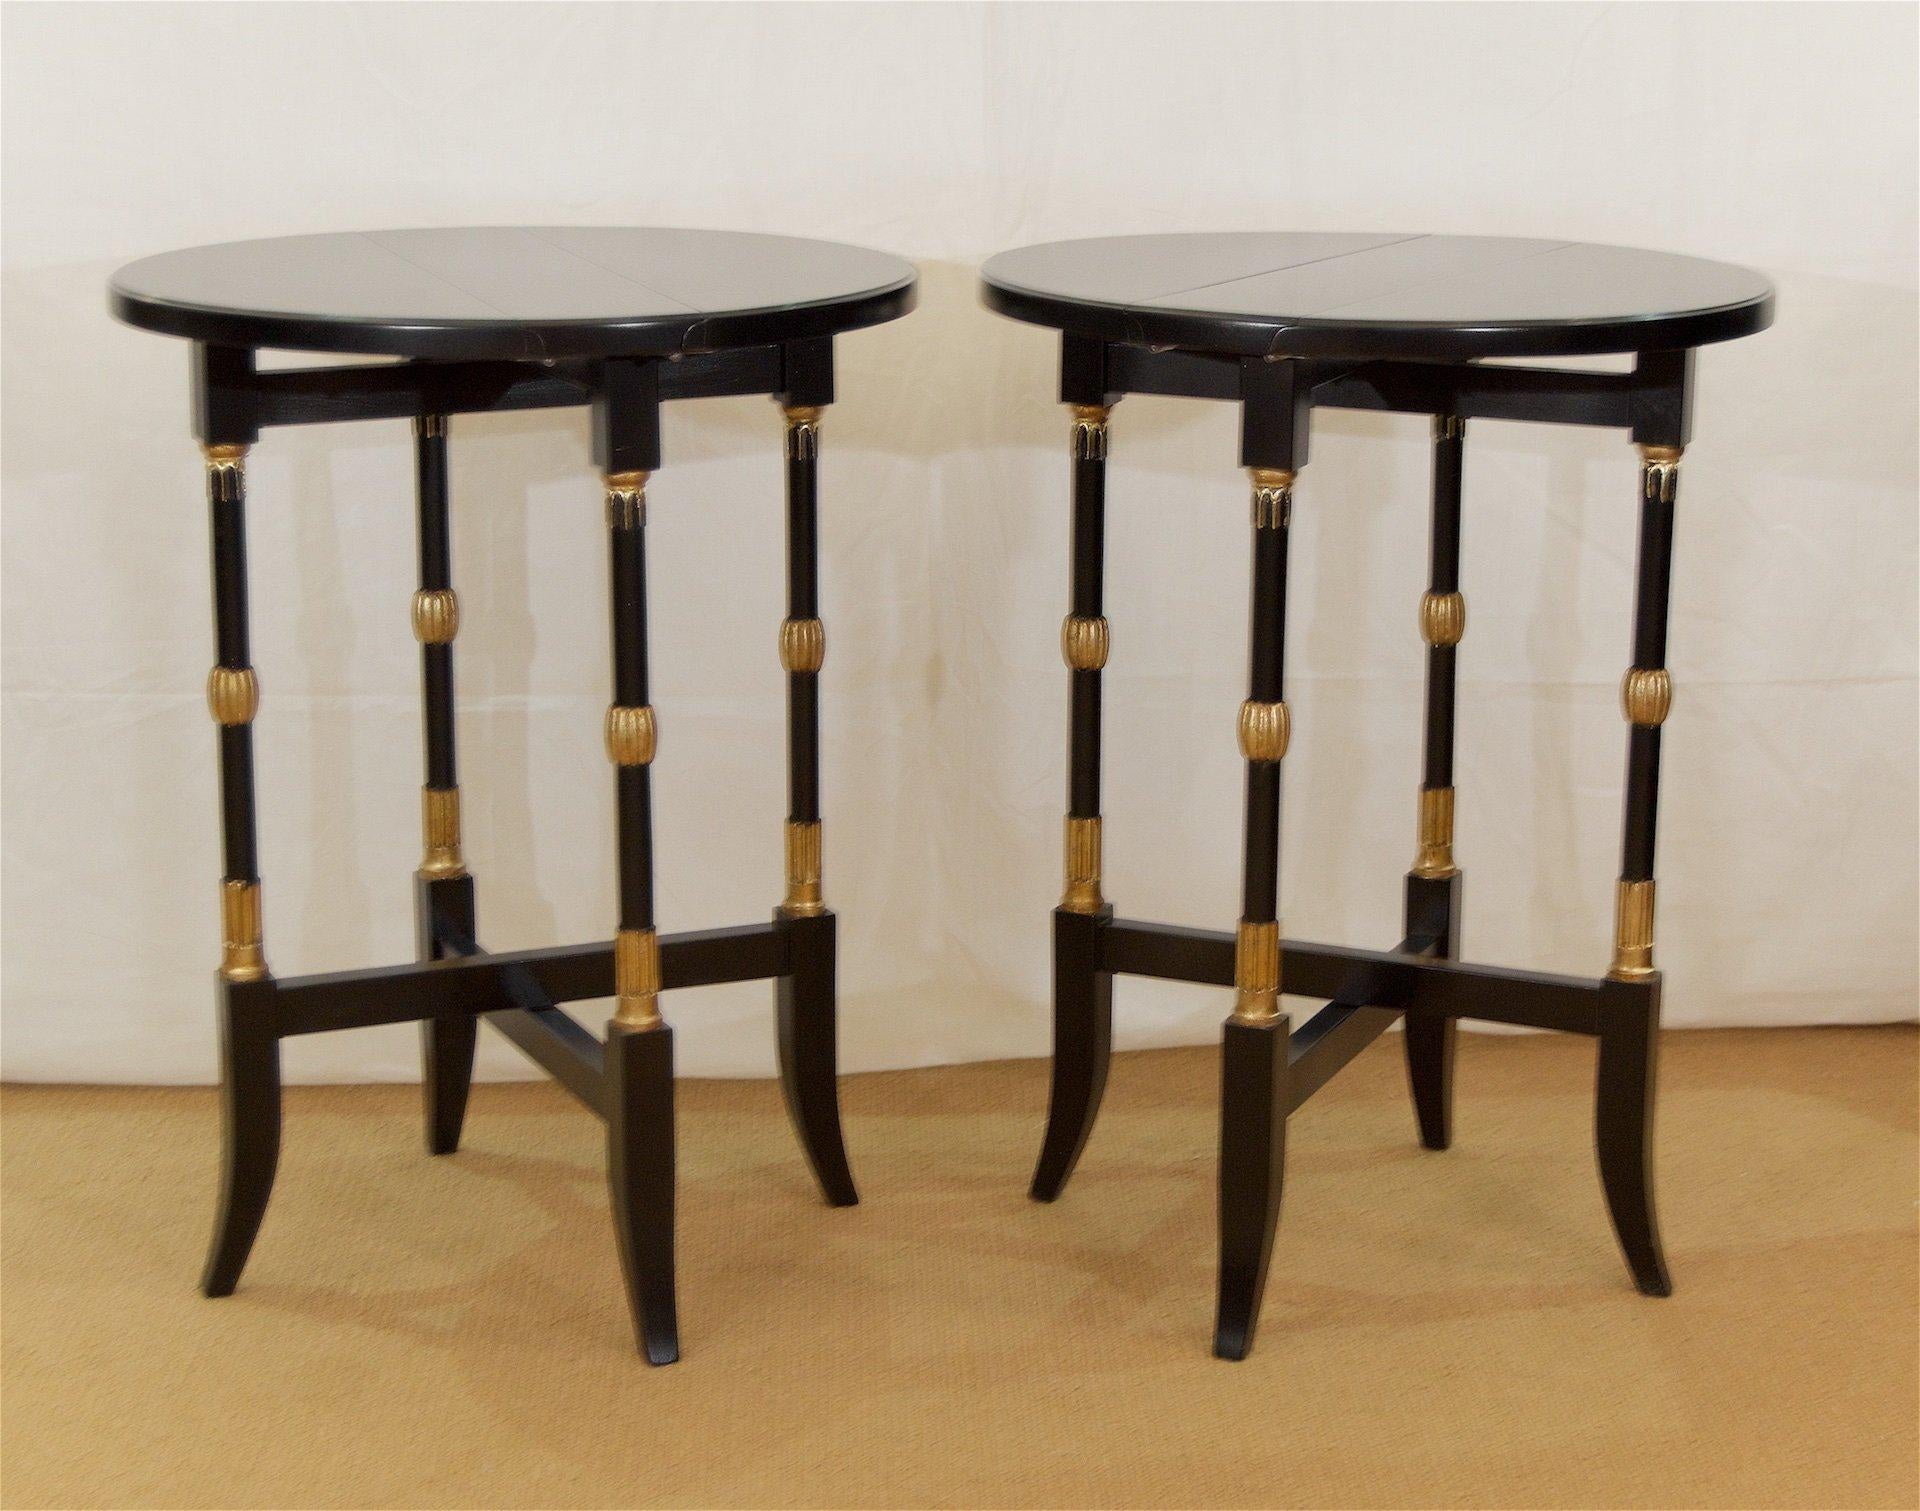 Lacquered Black Lacquer Regency-Style Folding Occasional Tables from the Fontainebleau For Sale